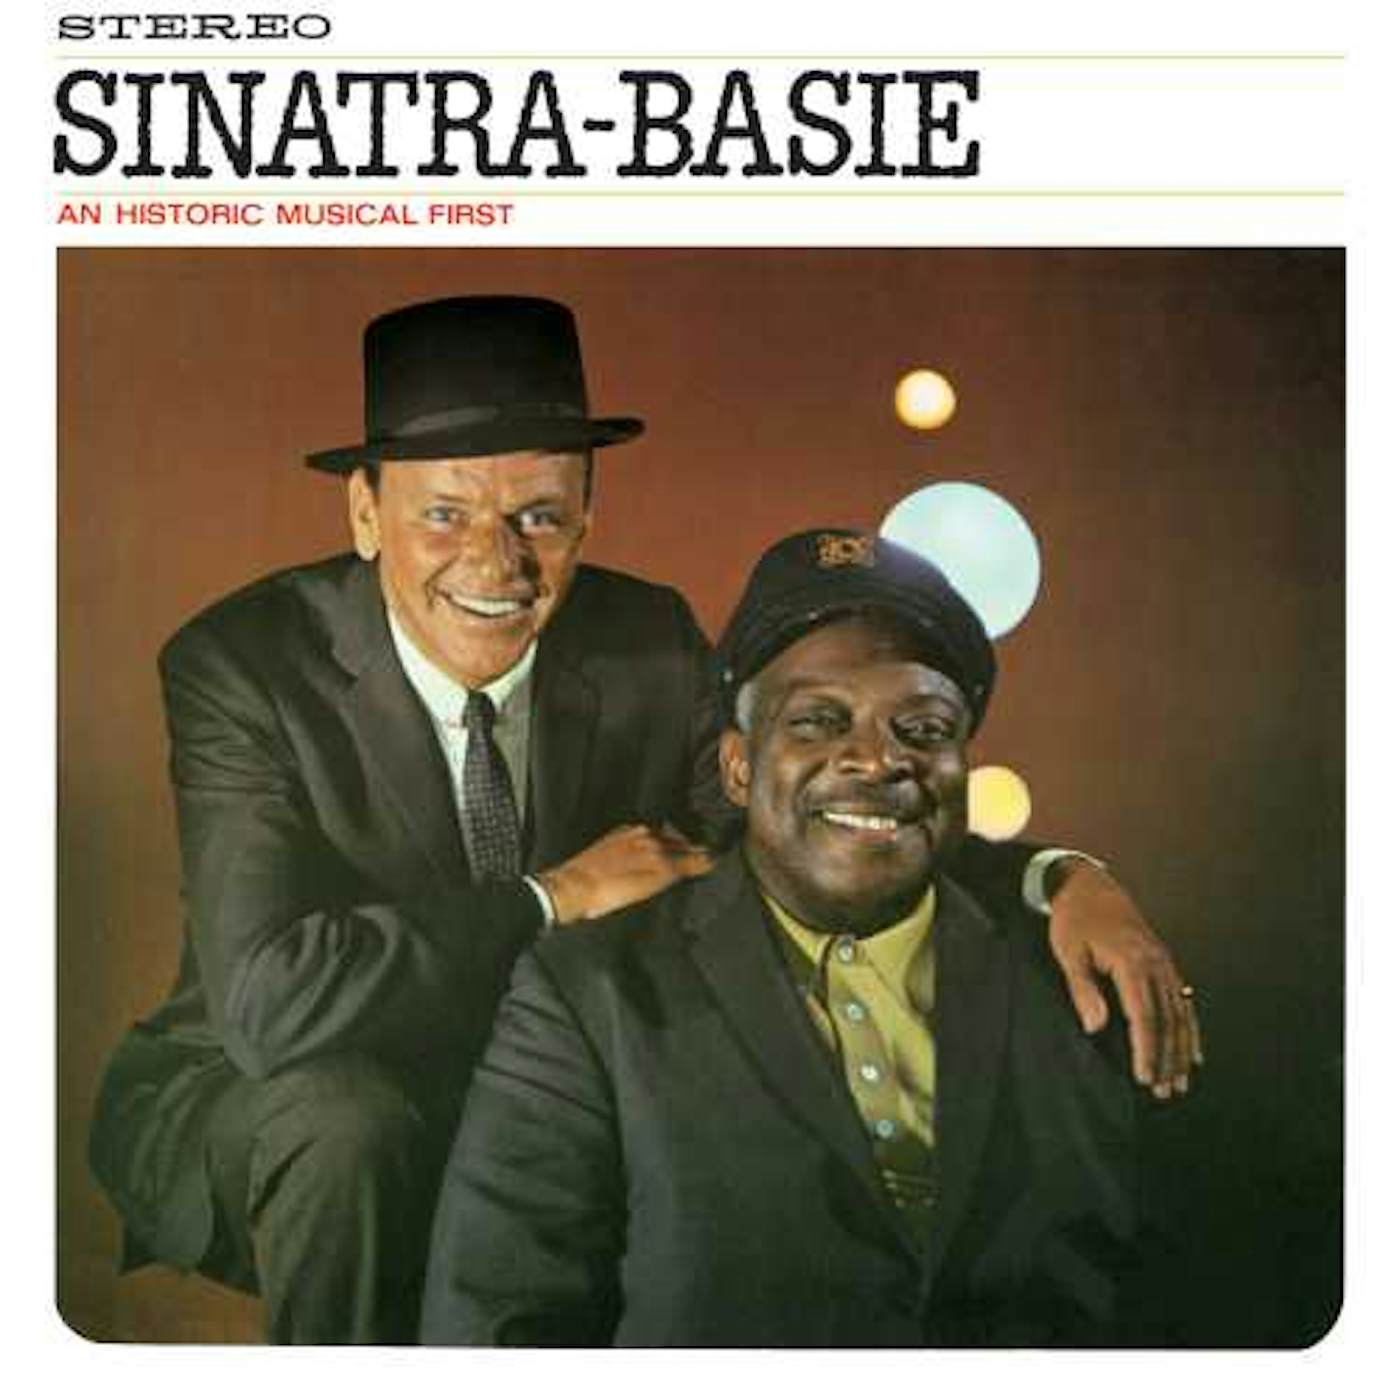 Frank Sinatra & Count Basie SINATRA-BASIE: AN HISTORIC MUSICAL FIRST Vinyl Record